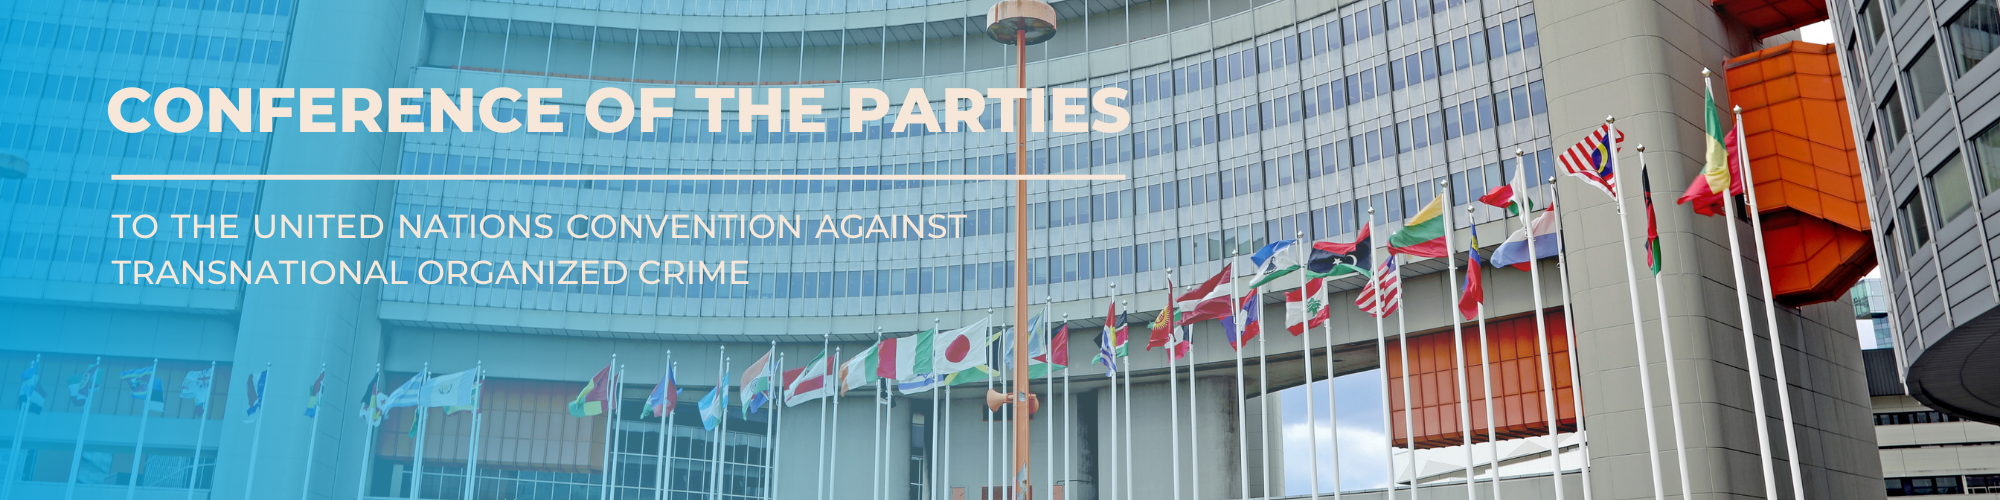 A visual with text reading "Conference of the Parties to the United Nations Convention against Transnational Organized Crime". In the background, an image of the Vienna International Centre.